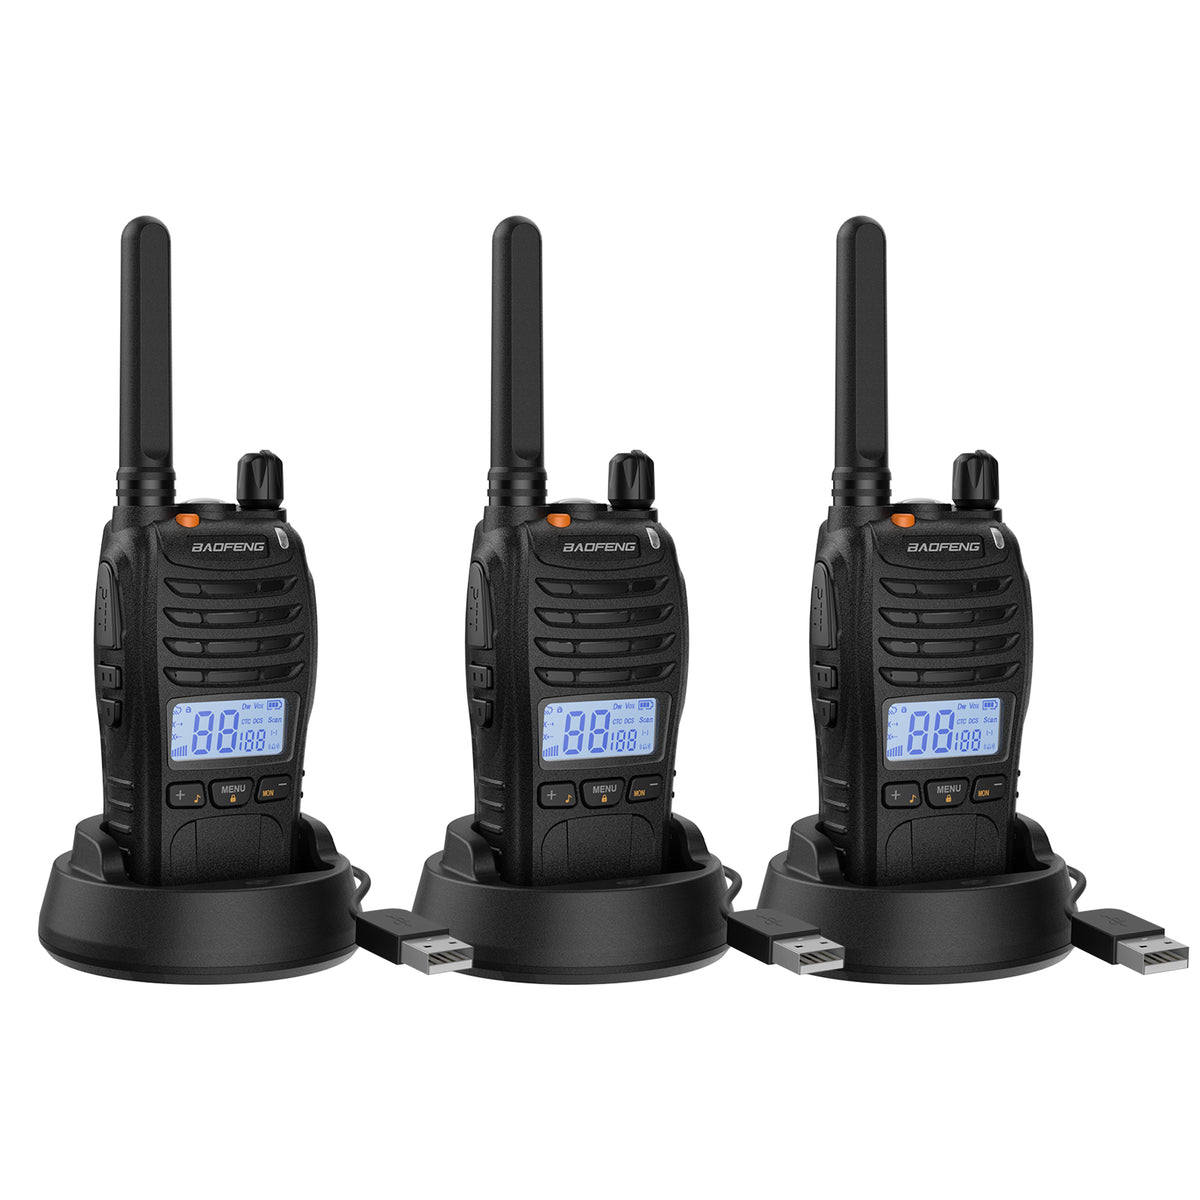 BAOFENG BF-88ST Walkie Talkies for Adults Long Range Pack, Portable Two Way Radio with Hands Free VOX USB Charging, Rechargeable Radios Walkie Tal - 3